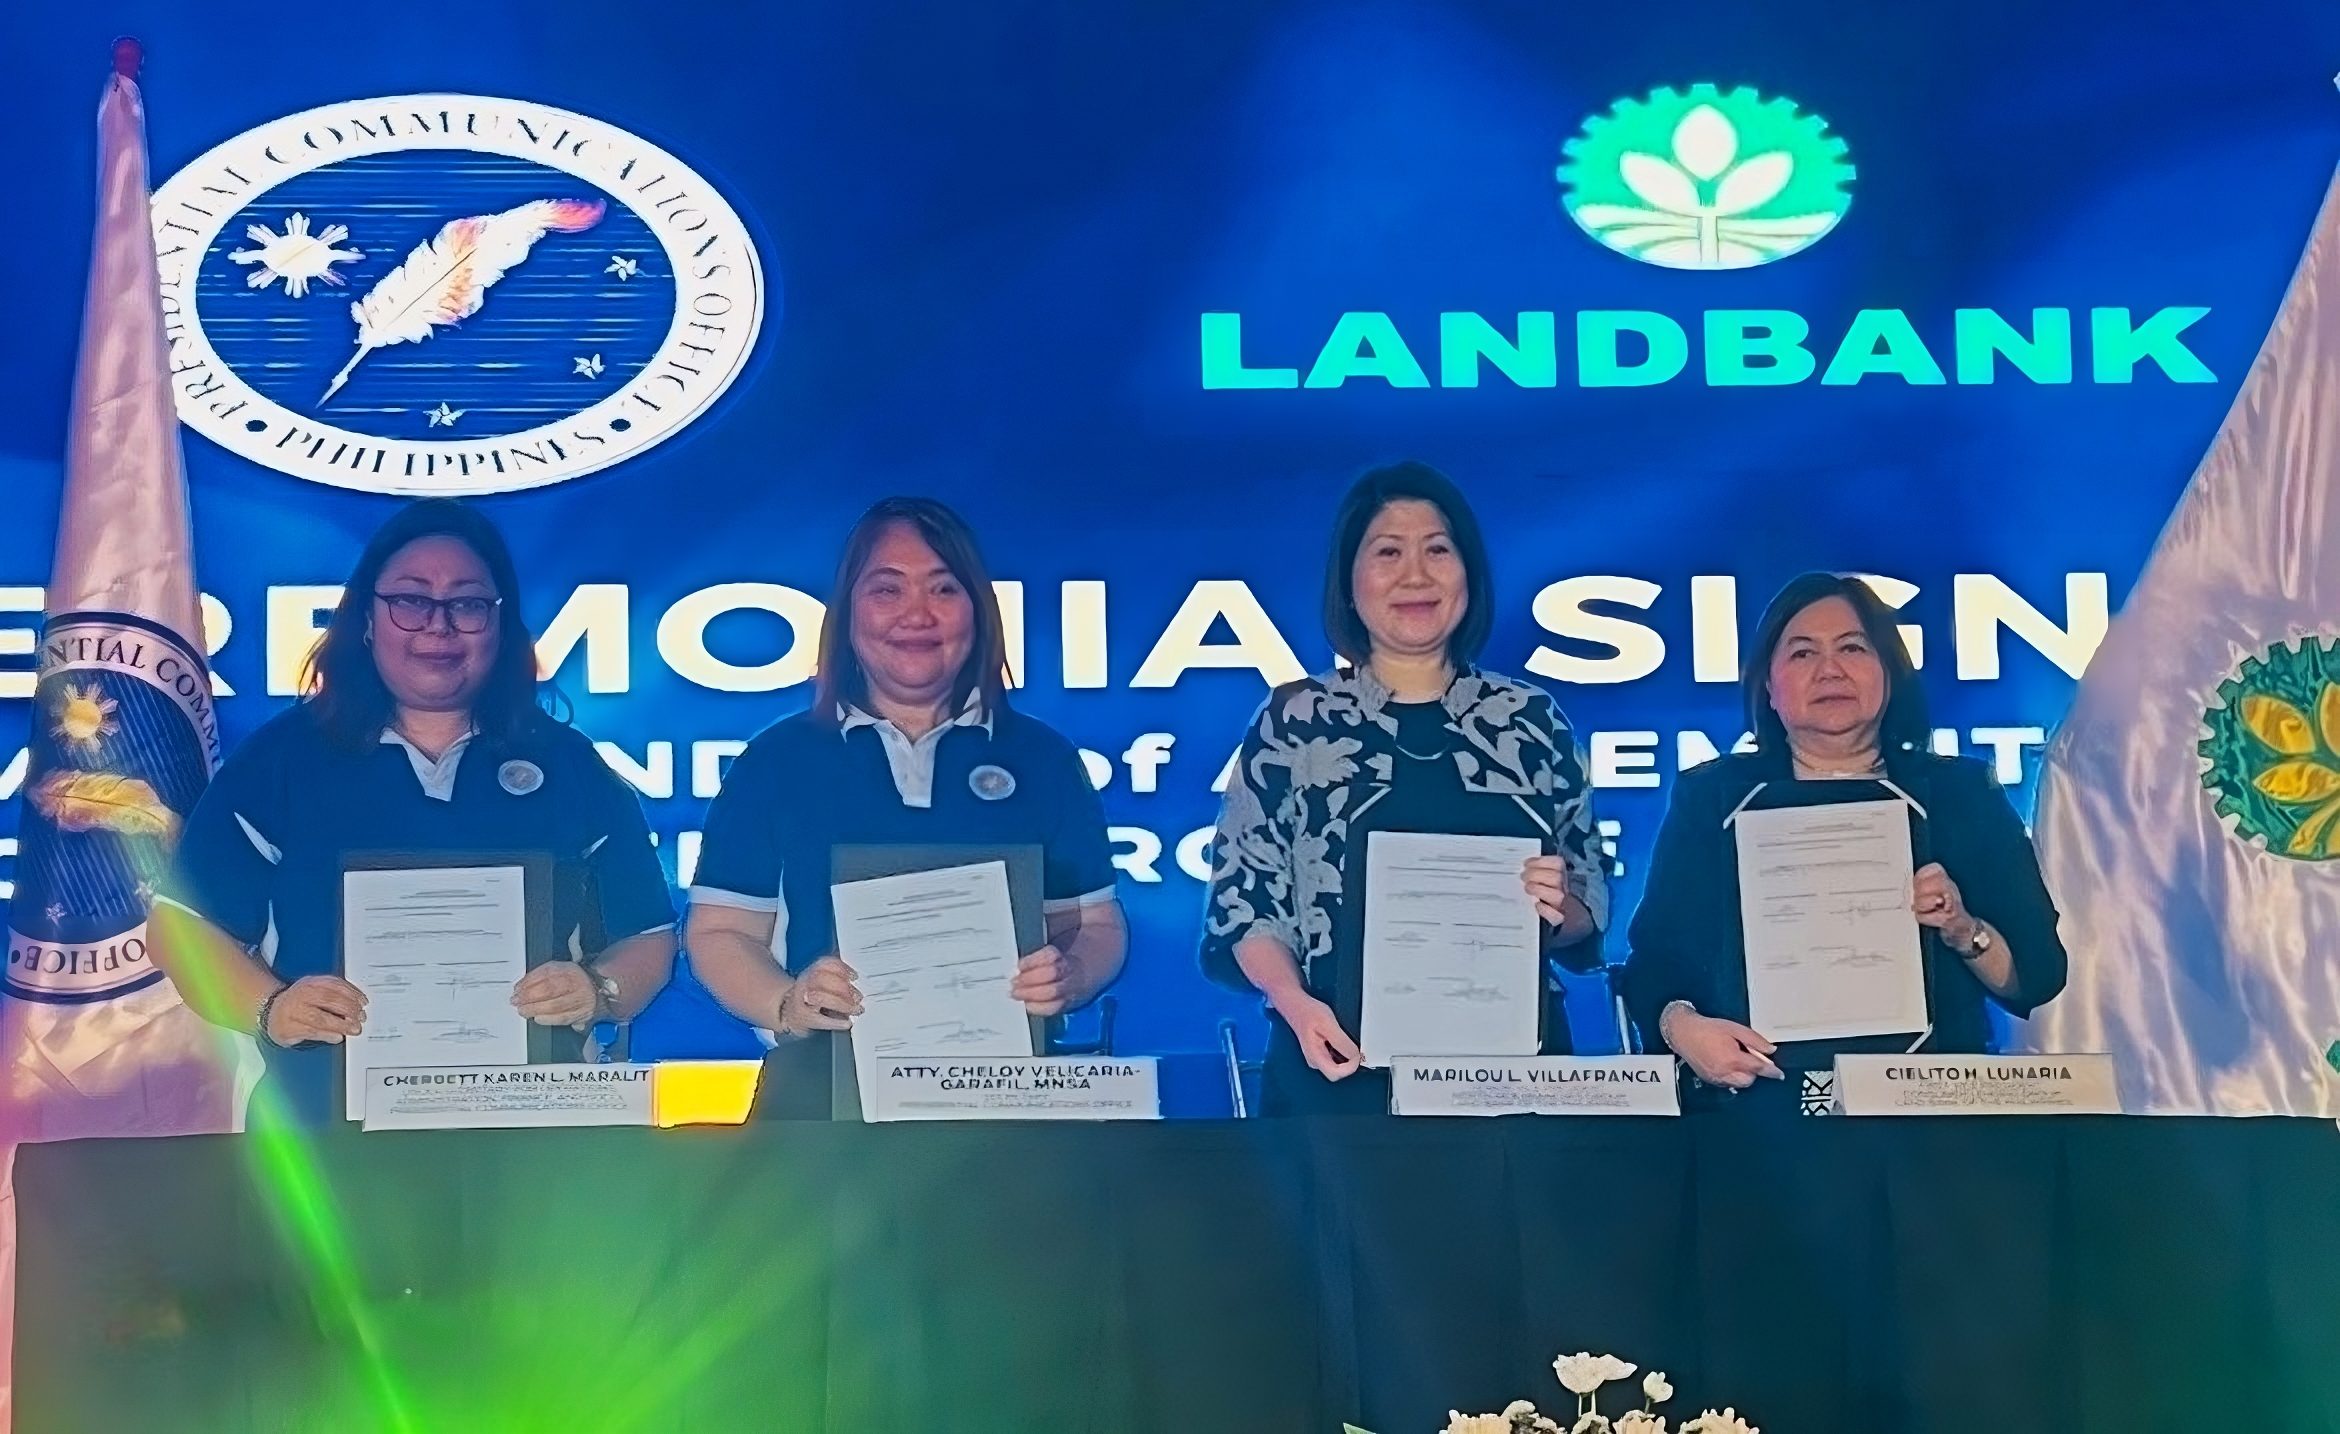 Presidential Communications Office gets its own Landbank ‘credit card’